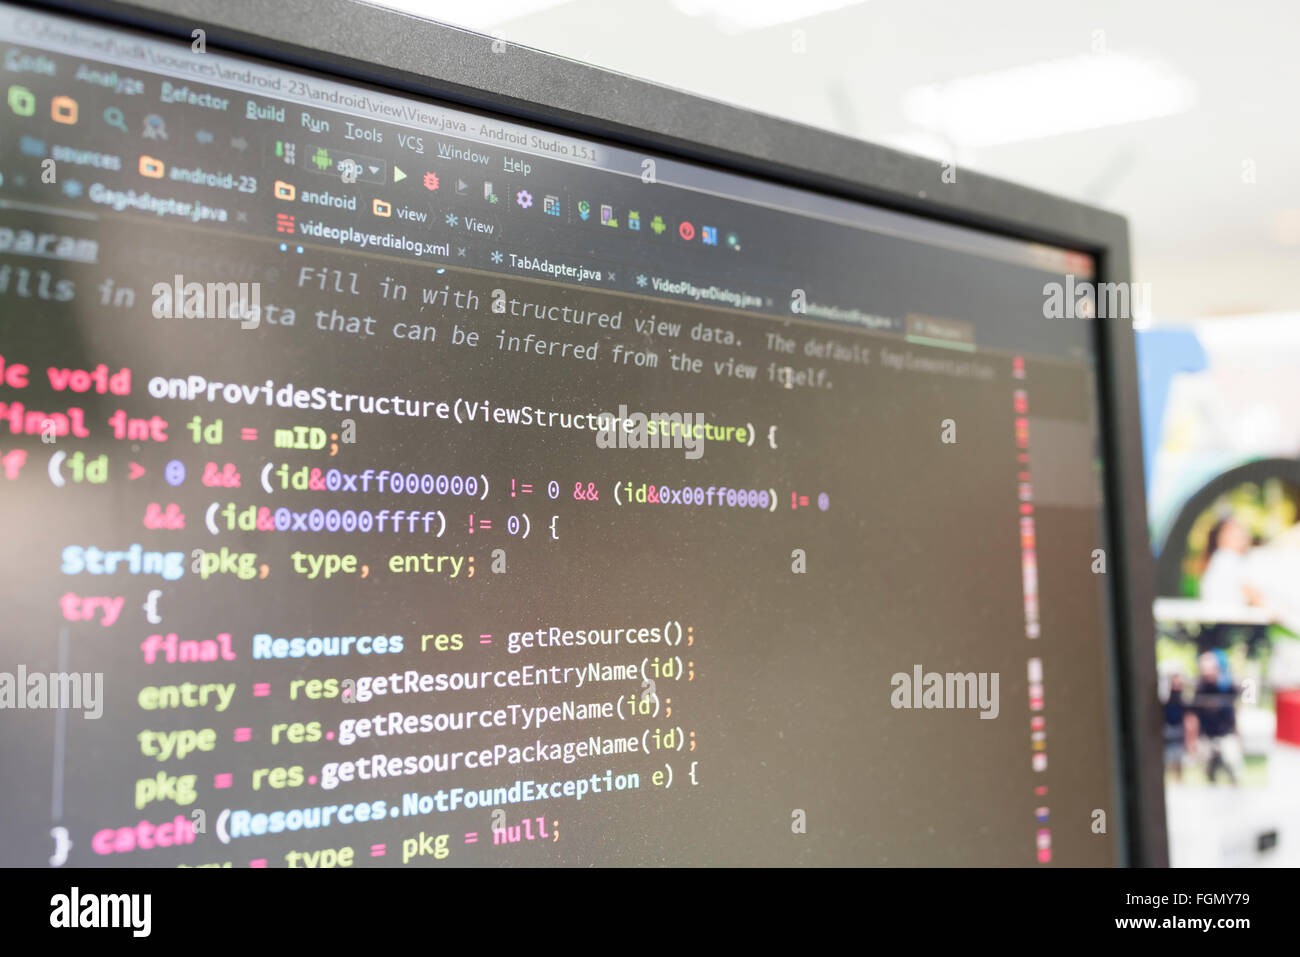 Html Code on Dark Background Stock Image - Image of software, screen:  155503891